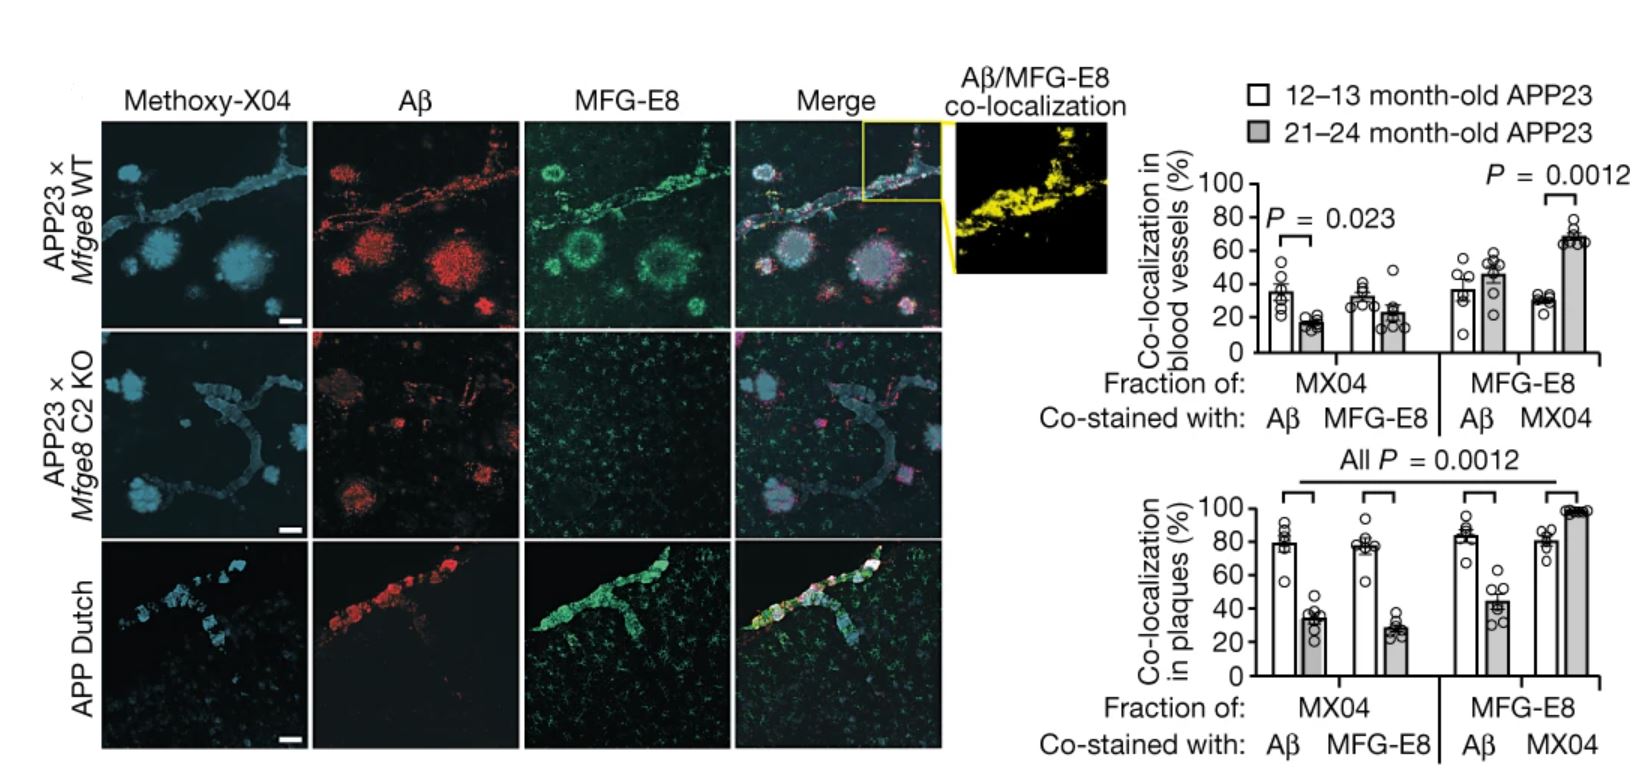 Brain sections from mouse models of Alzheimer's disease stained for MFG-E8